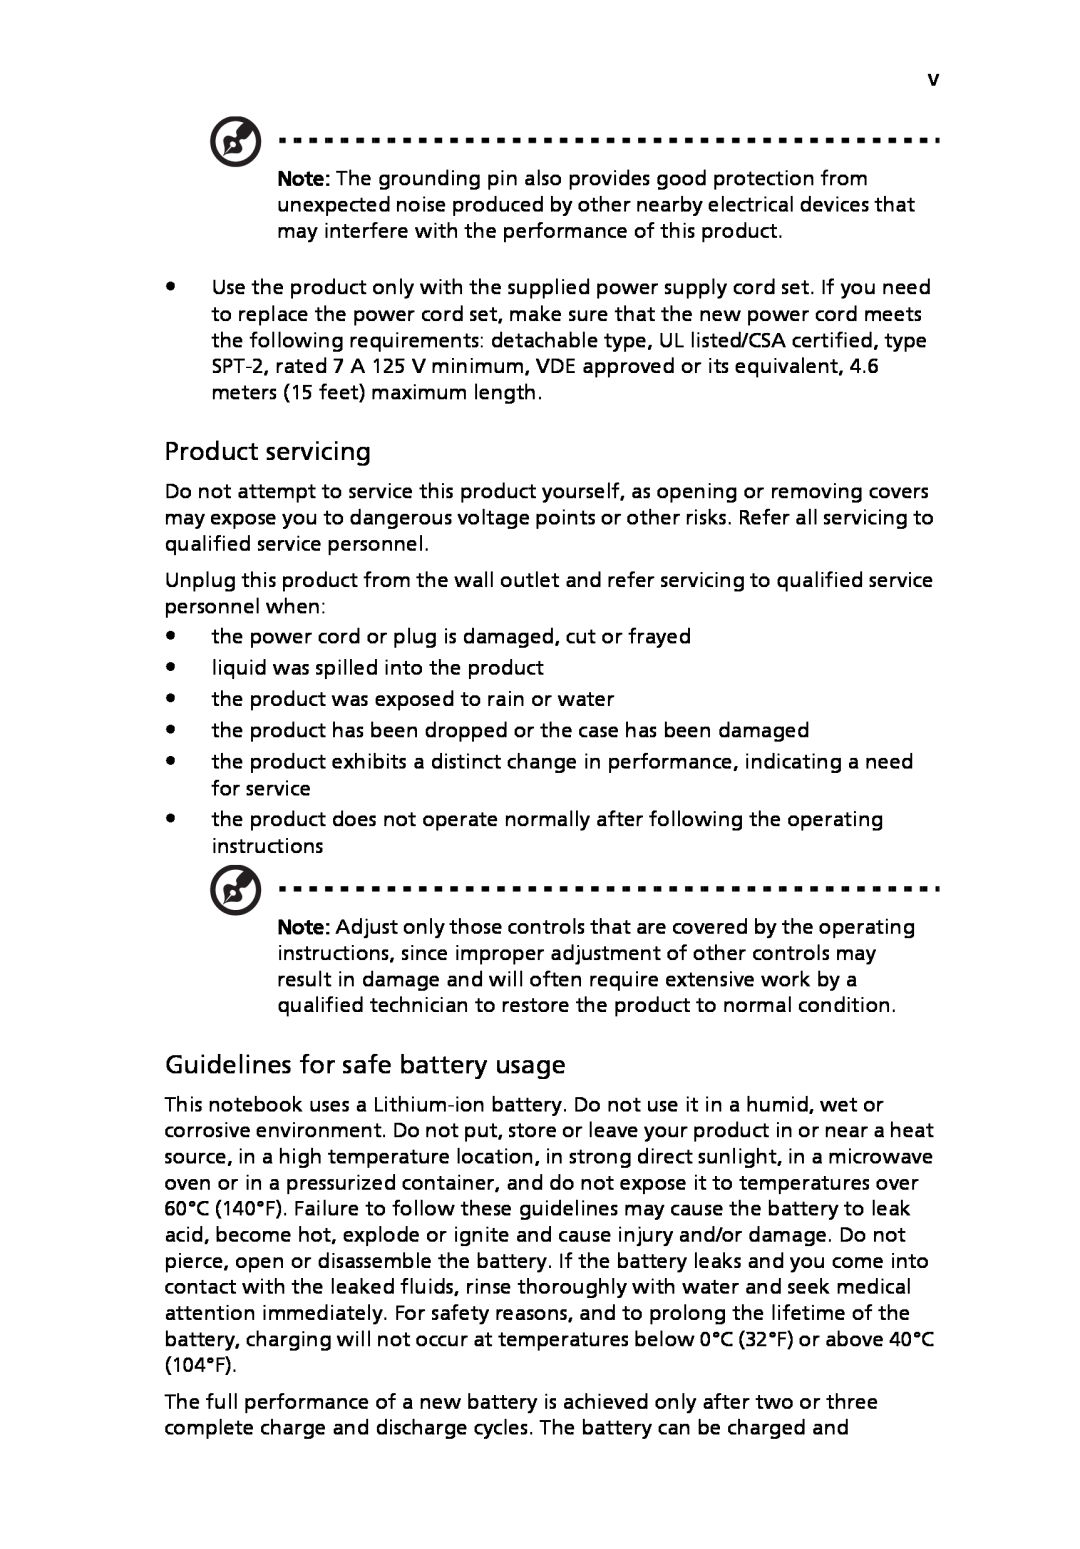 Acer 5520G, 5220 manual Product servicing, Guidelines for safe battery usage 